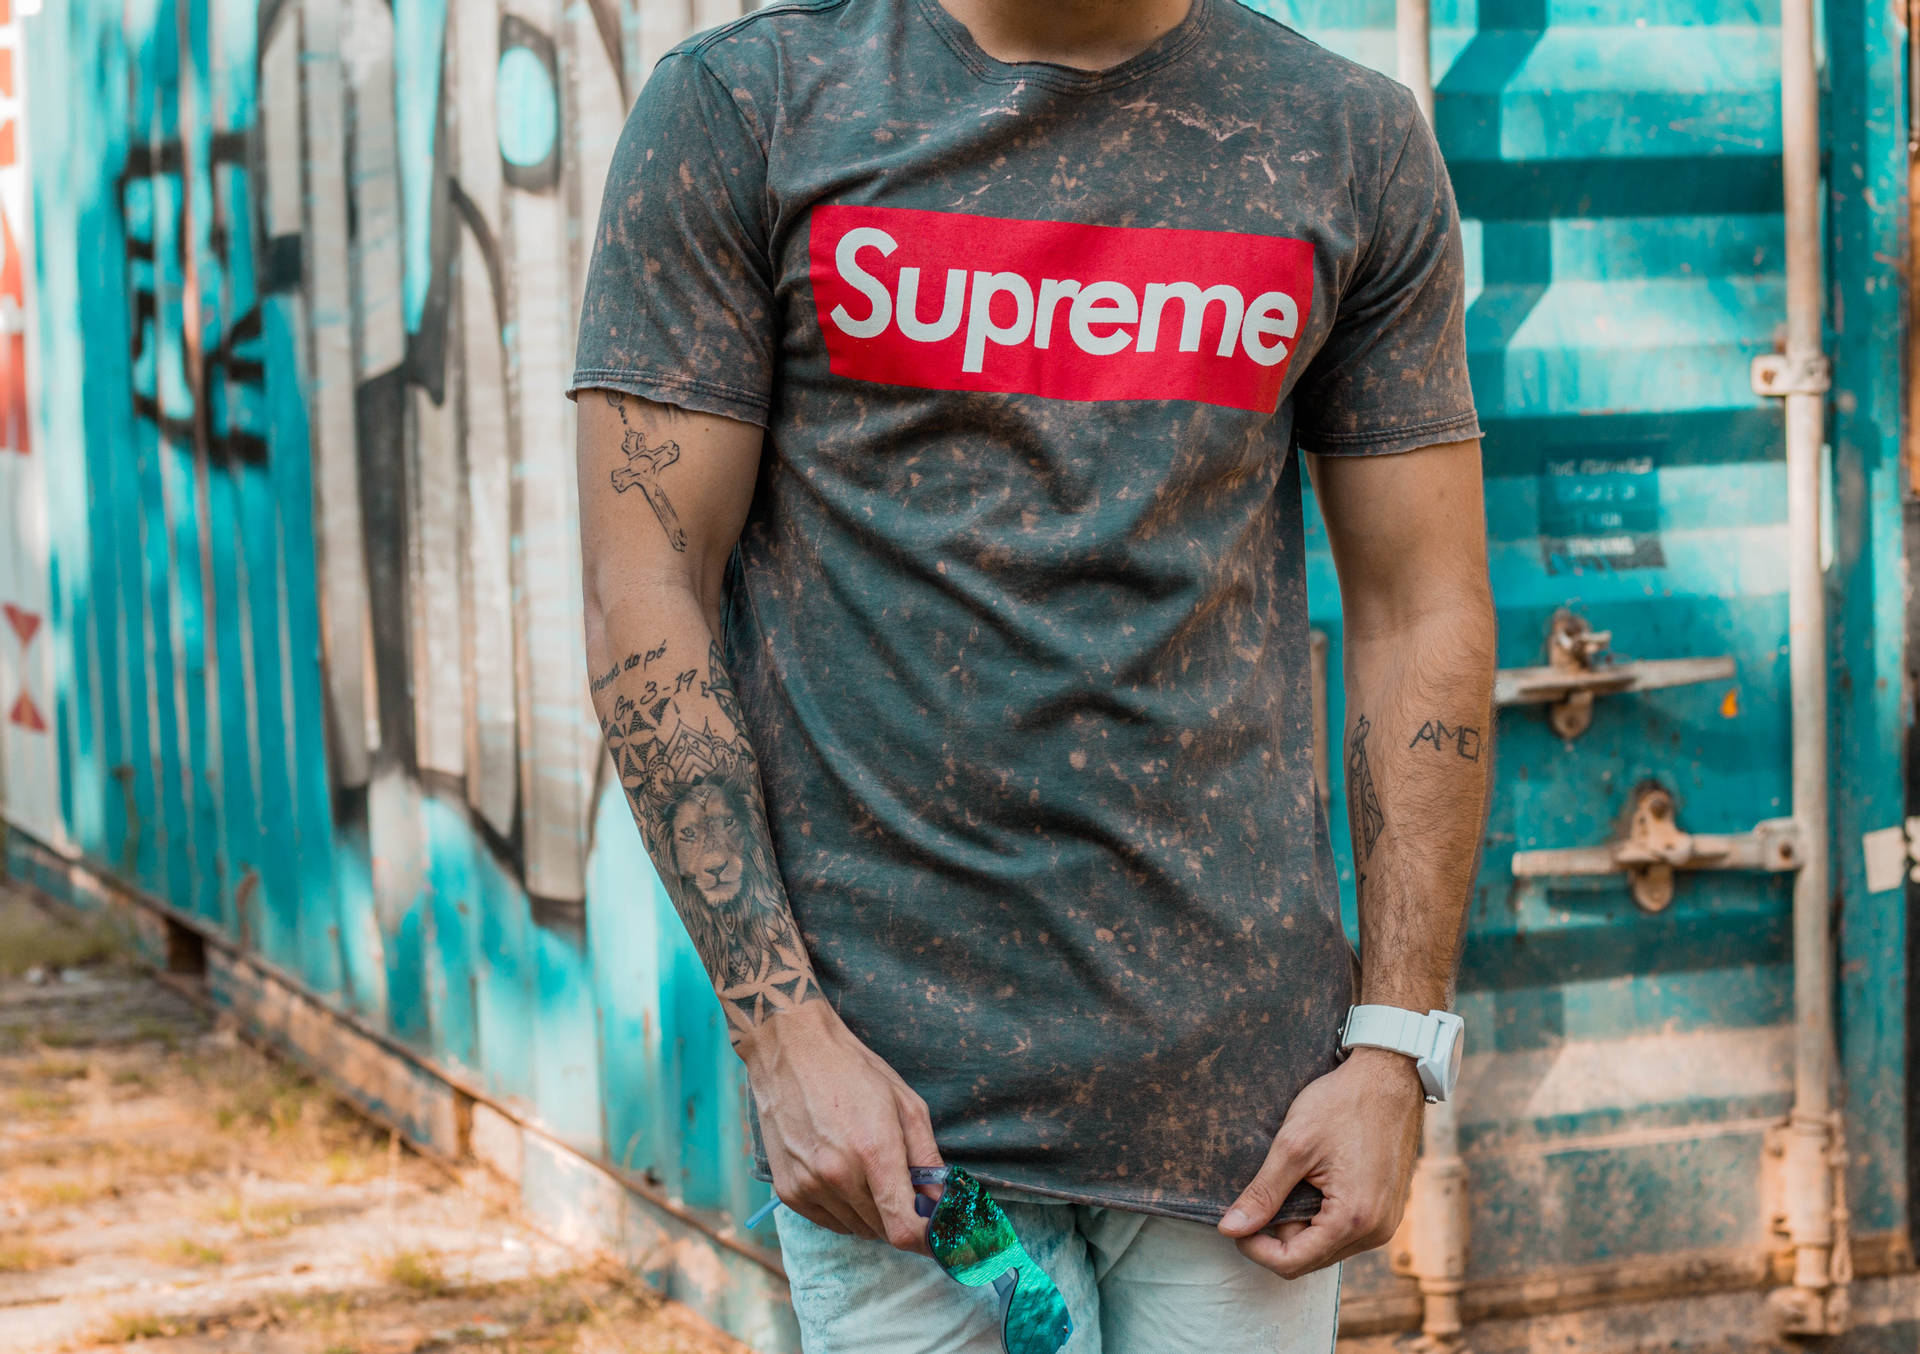 5173X3648 Supreme Wallpaper and Background